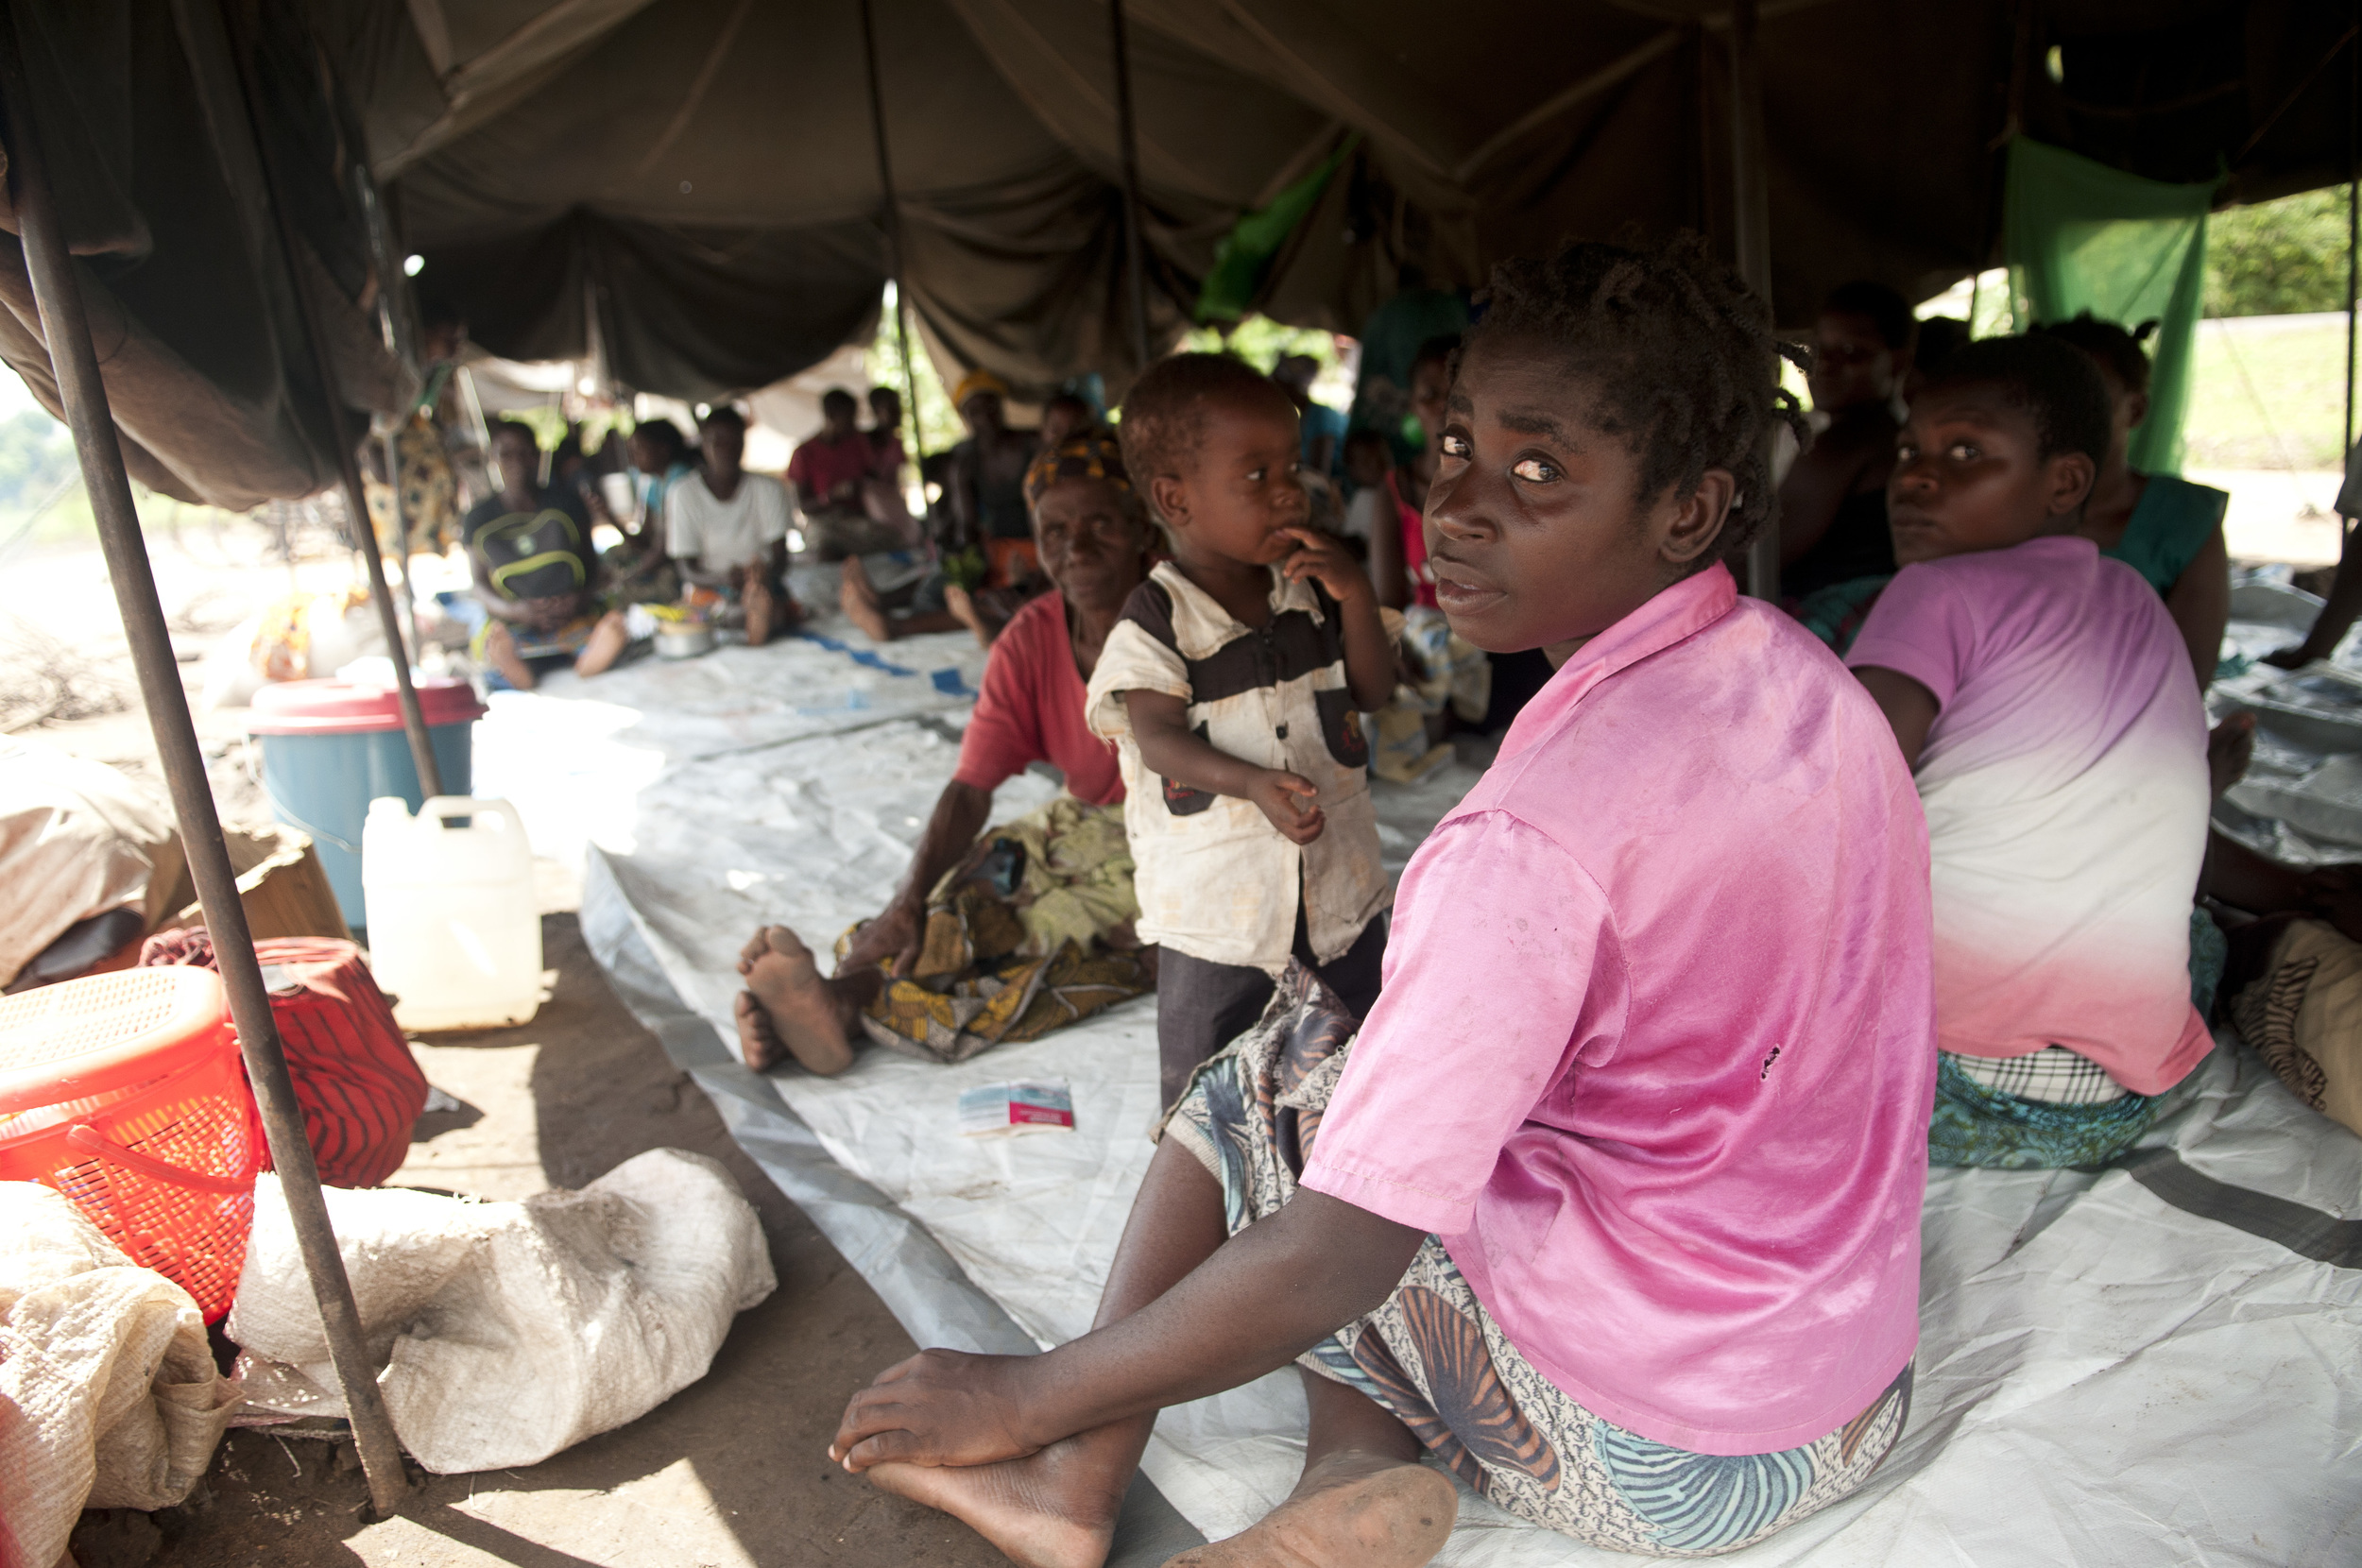 Flood victims seek shelter in tents at Sekani 1 camp in Chikwawa district.